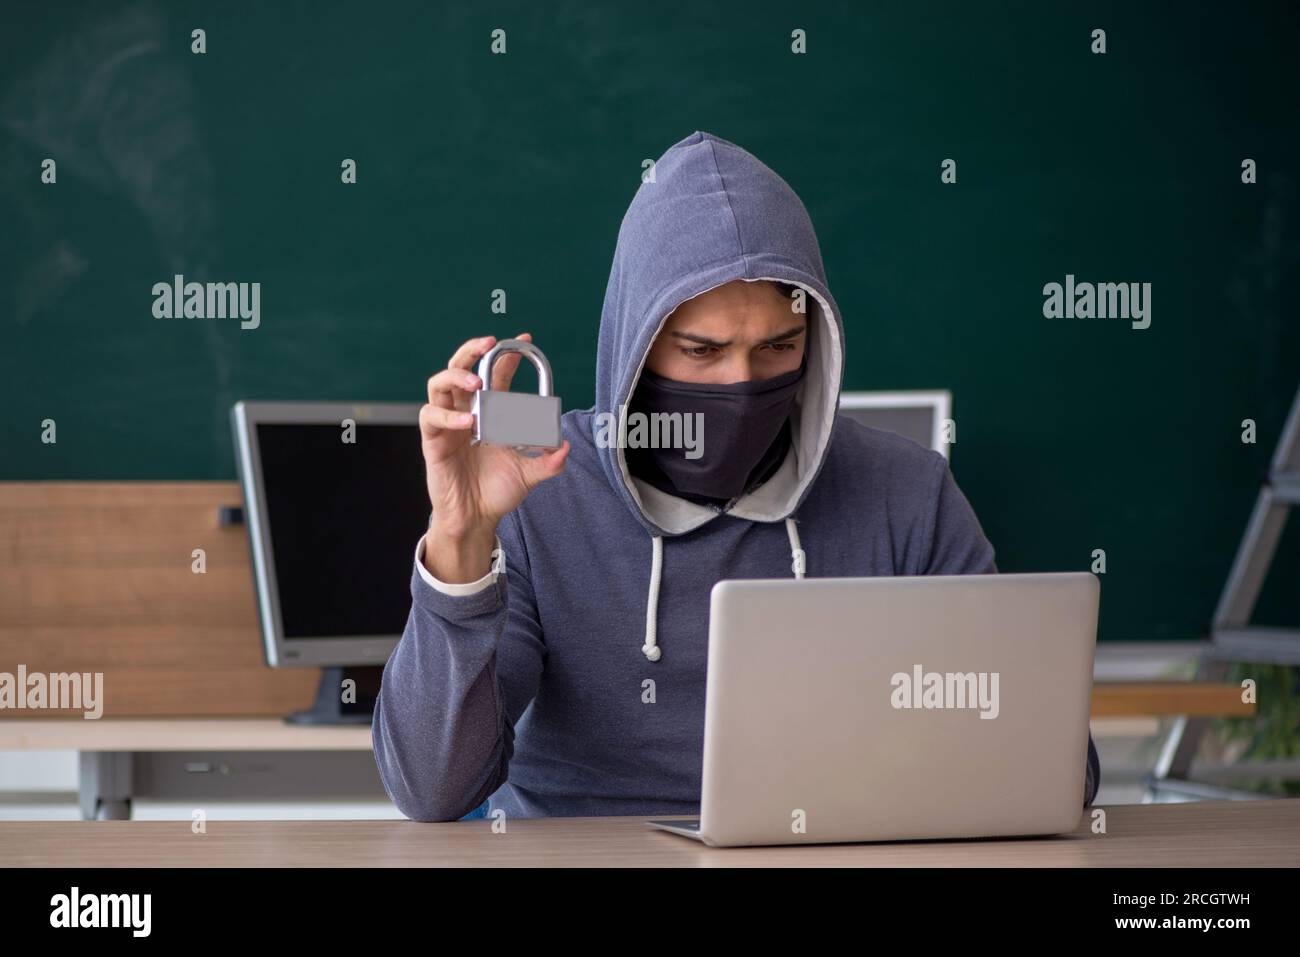 Young hacker sitting in the classroom Stock Photo